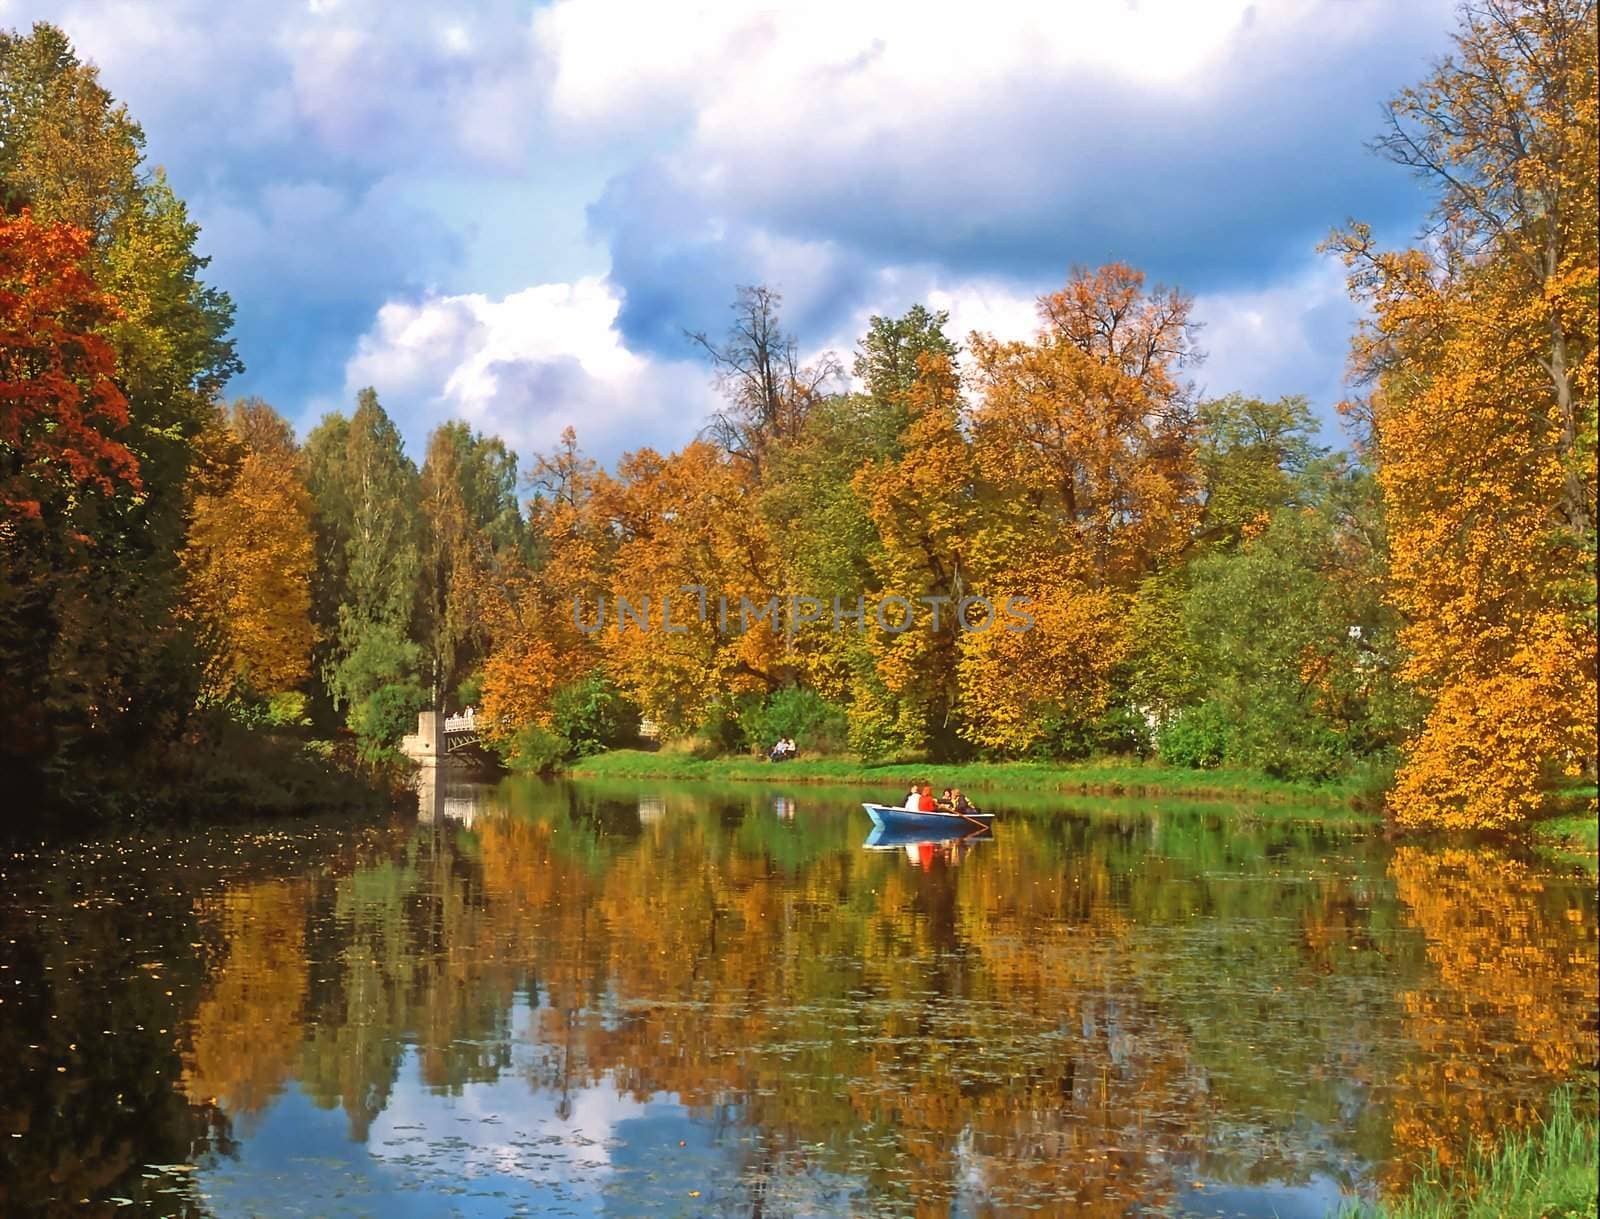 Autumn trees and pond with a boat